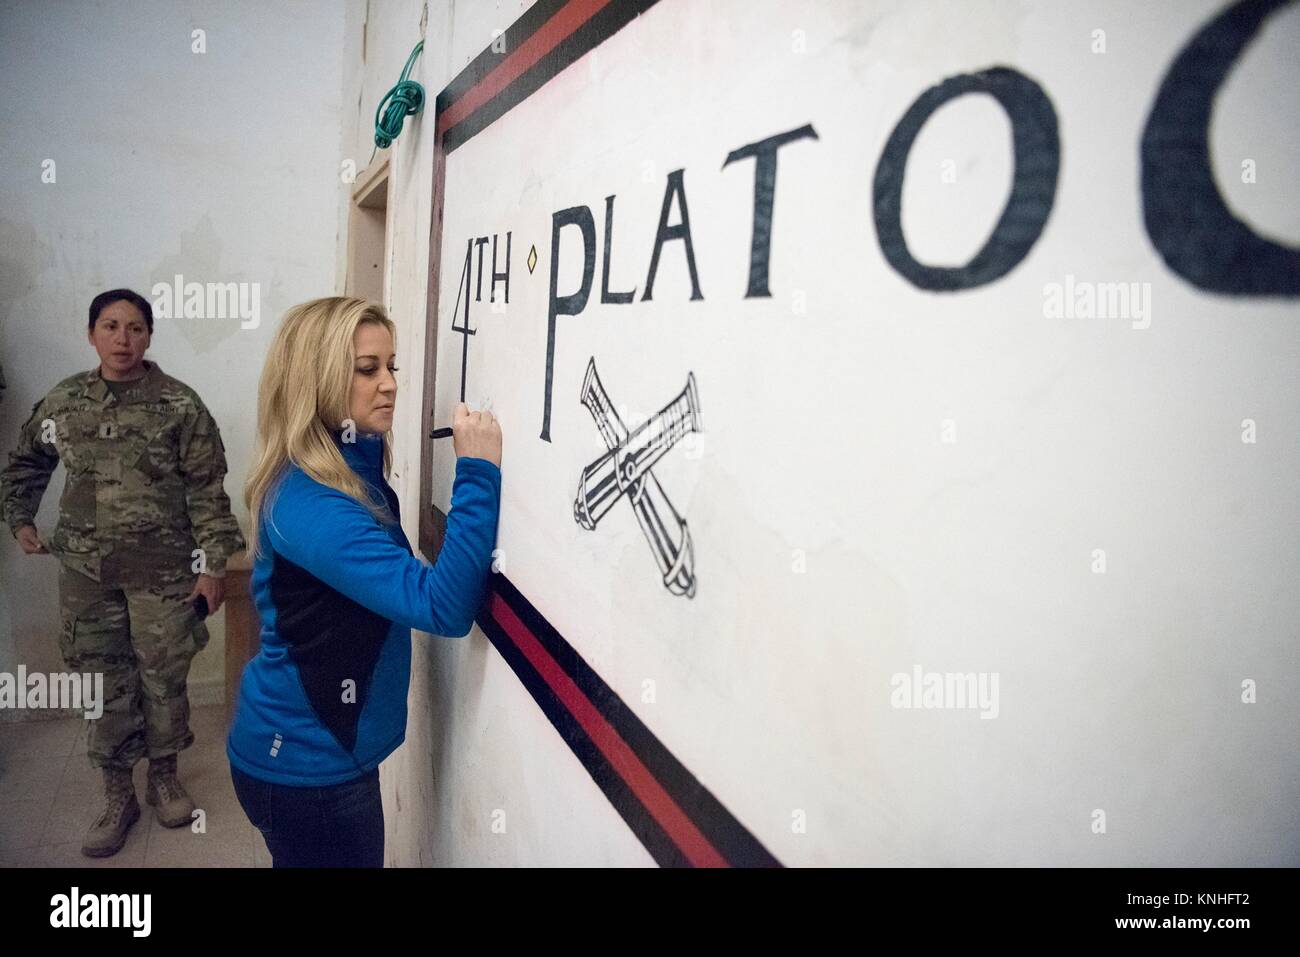 Country music singer Kellie Pickler signs her autograph while visiting U.S. soldiers for the CJCS USO Holiday Tour December 25, 2016 in Iraq.  (photo by PO2 Dominique A. Pineiro  via Planetpix) Stock Photo